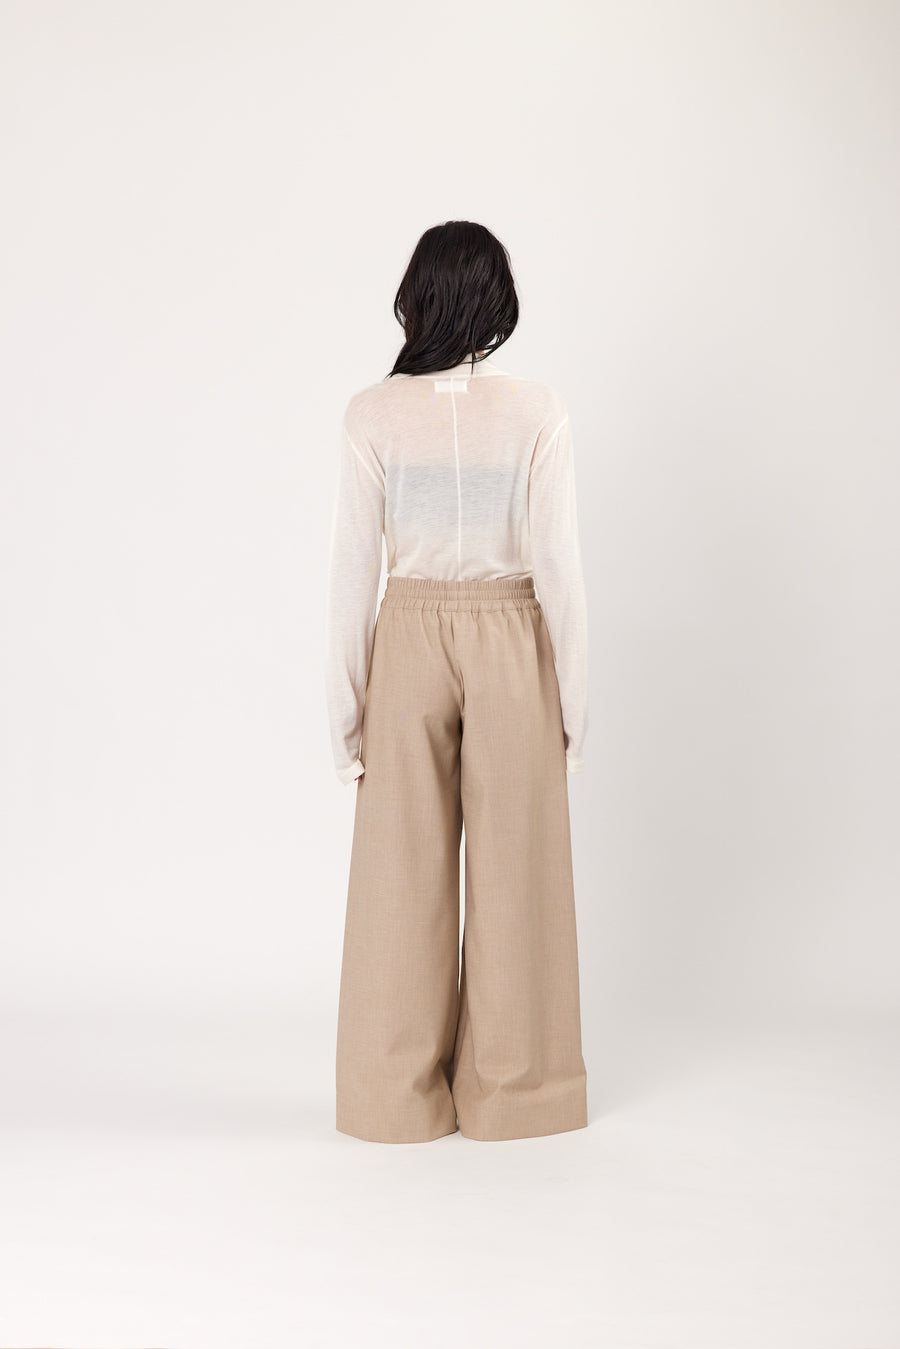 CLOVER TOP - IVORY